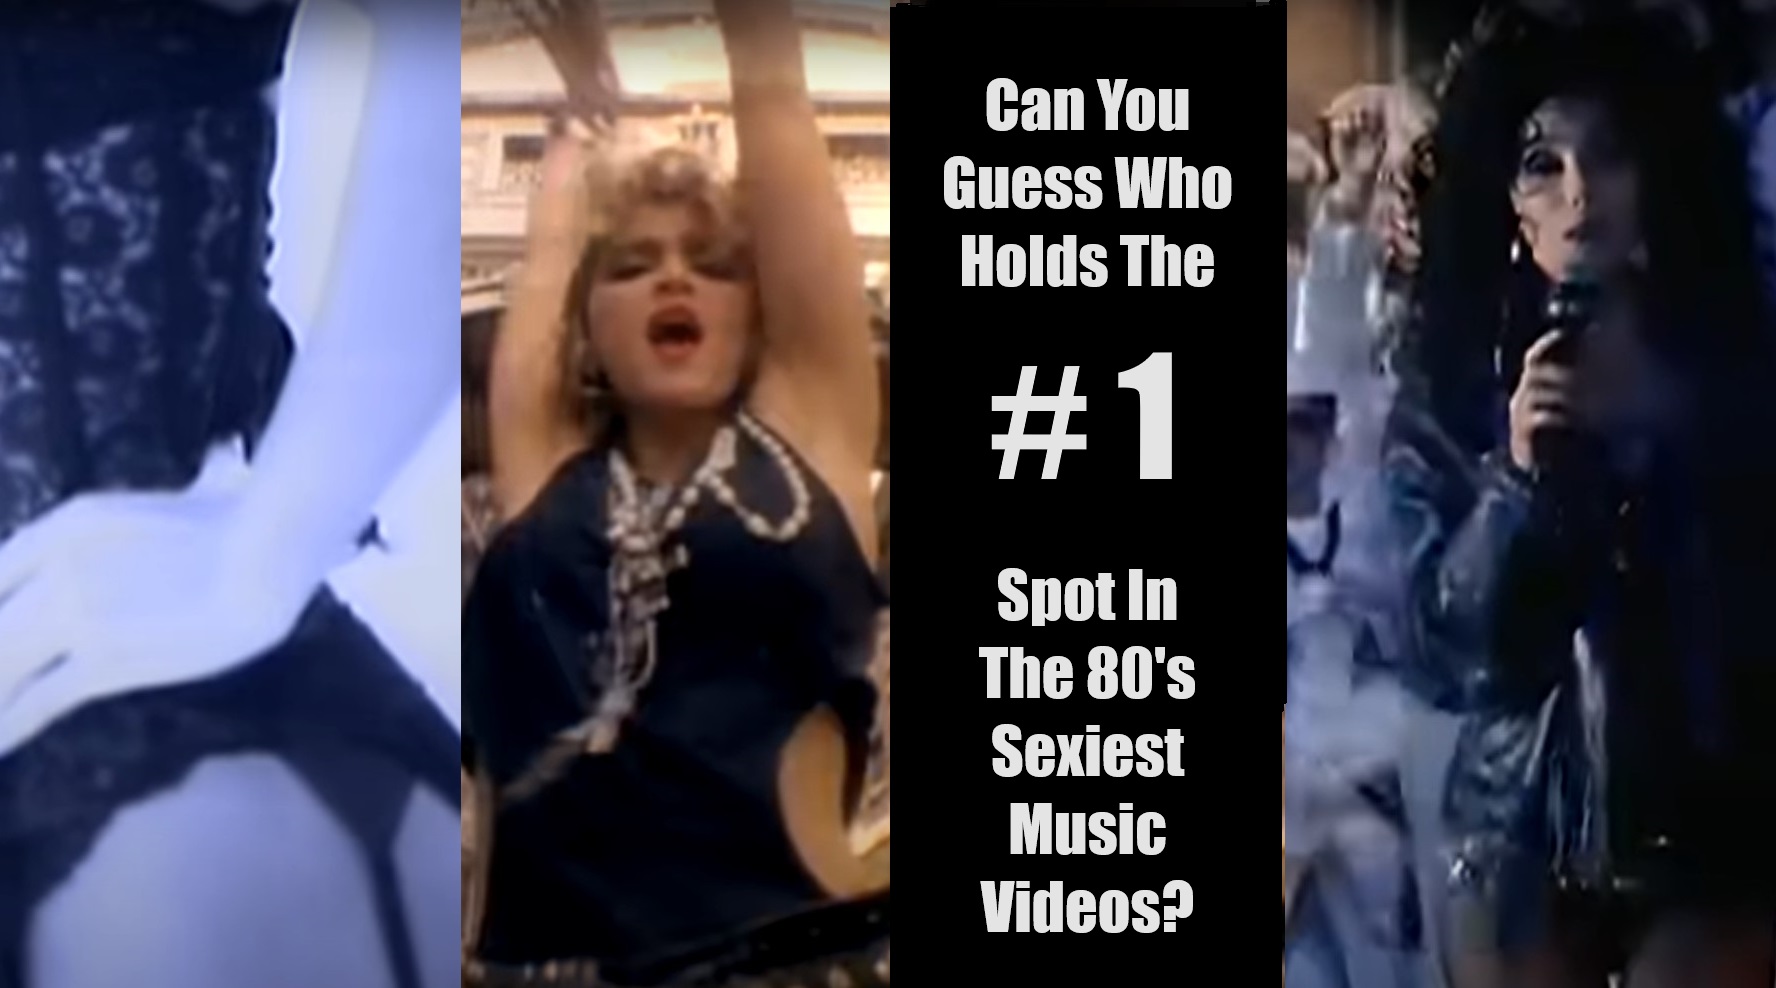 The Top 10 Sexiest Music Videos Of The 80s